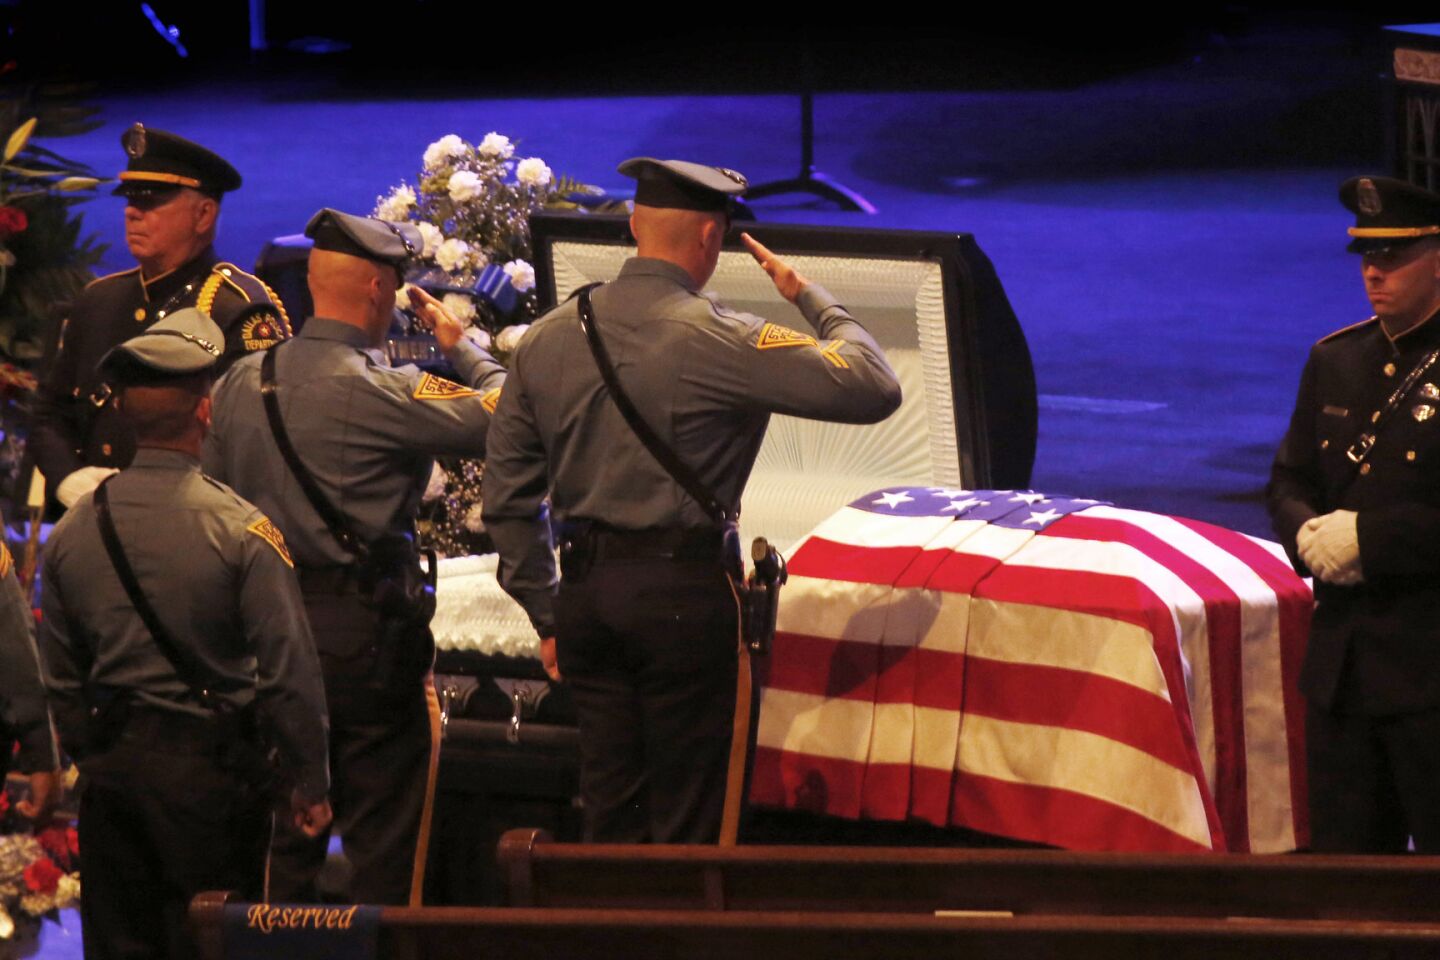 Funeral services are held for Dallas Police Sr. Cpl. Lorne Ahrens at Prestonwood Baptist Church in Plano, Texas.